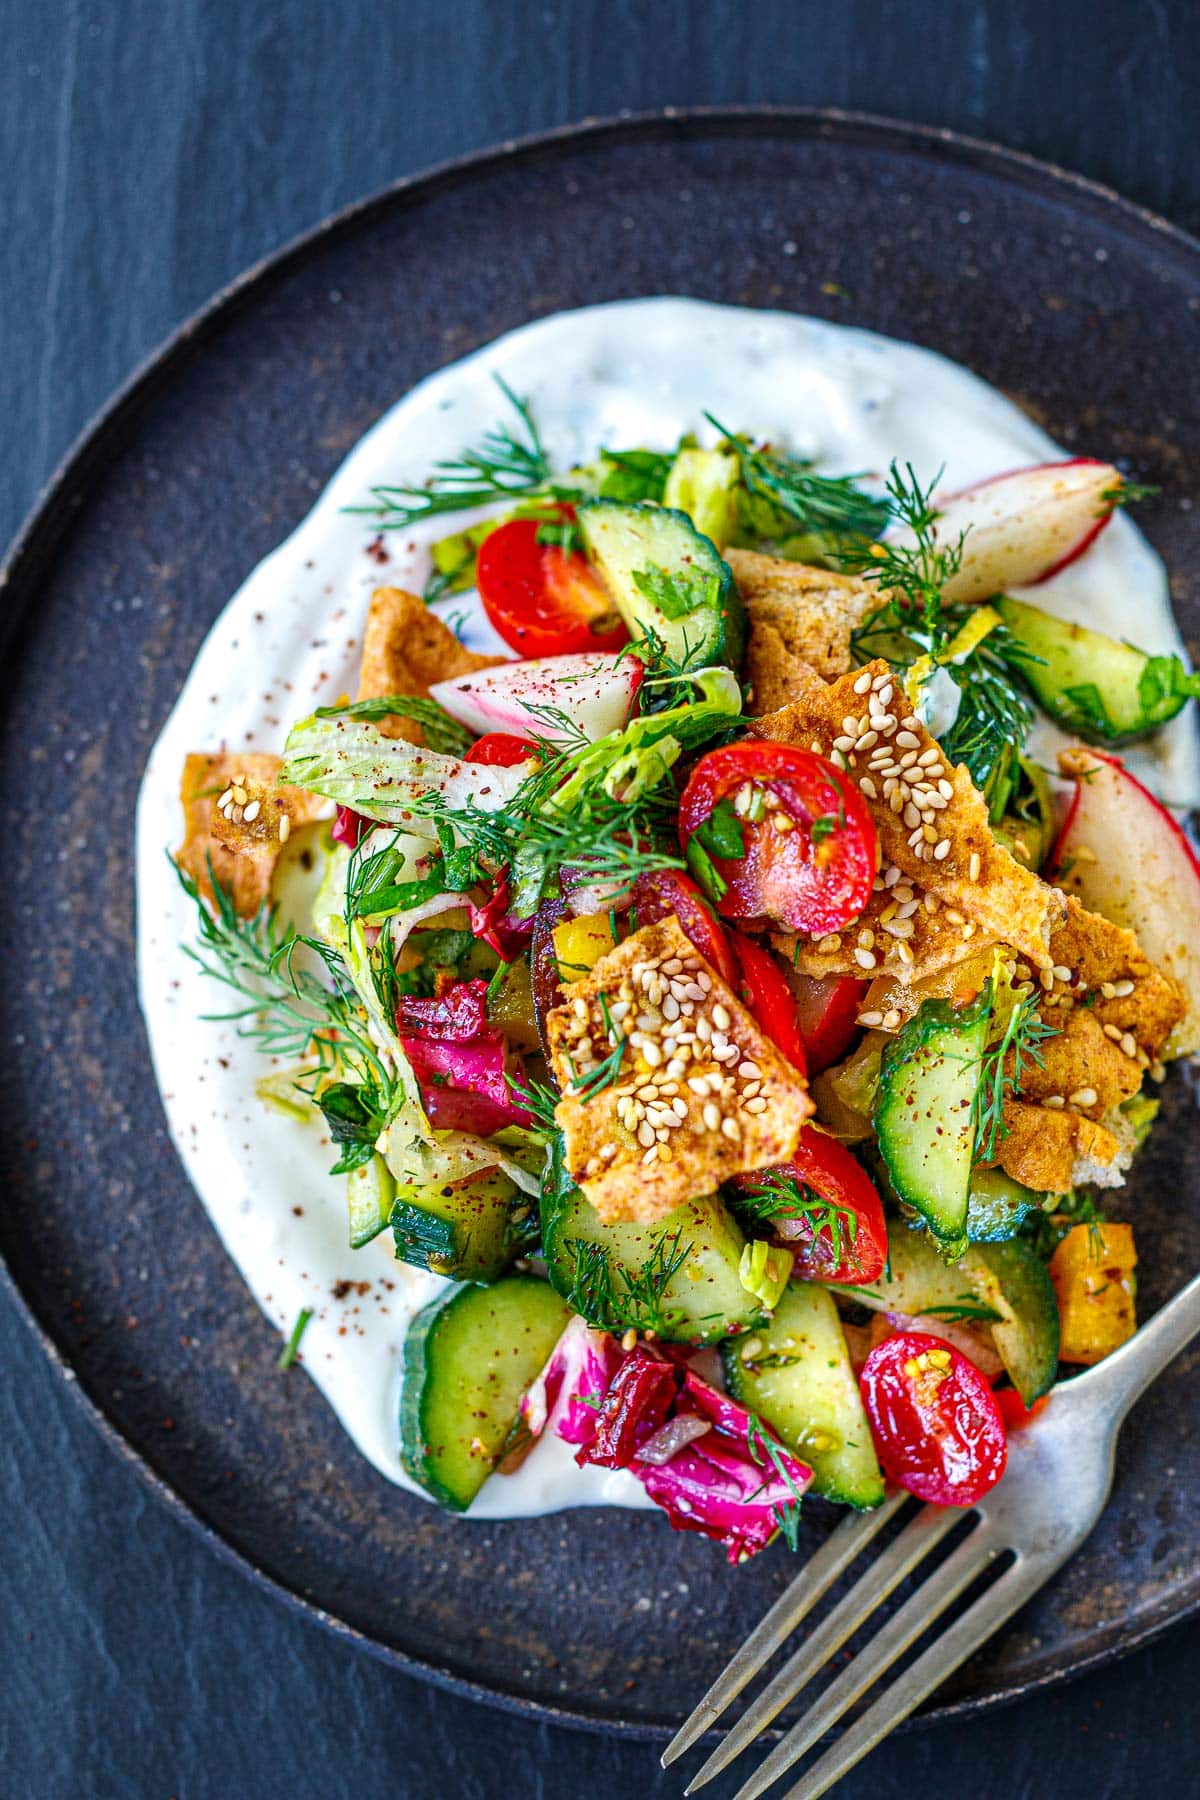 This Fattoush recipe is fresh, light and flavorful, made with chopped vegetables, fresh herbs and toasty pita chips in a tangy sumac dressing, all piled over a creamy yogurt-tahini sauce.